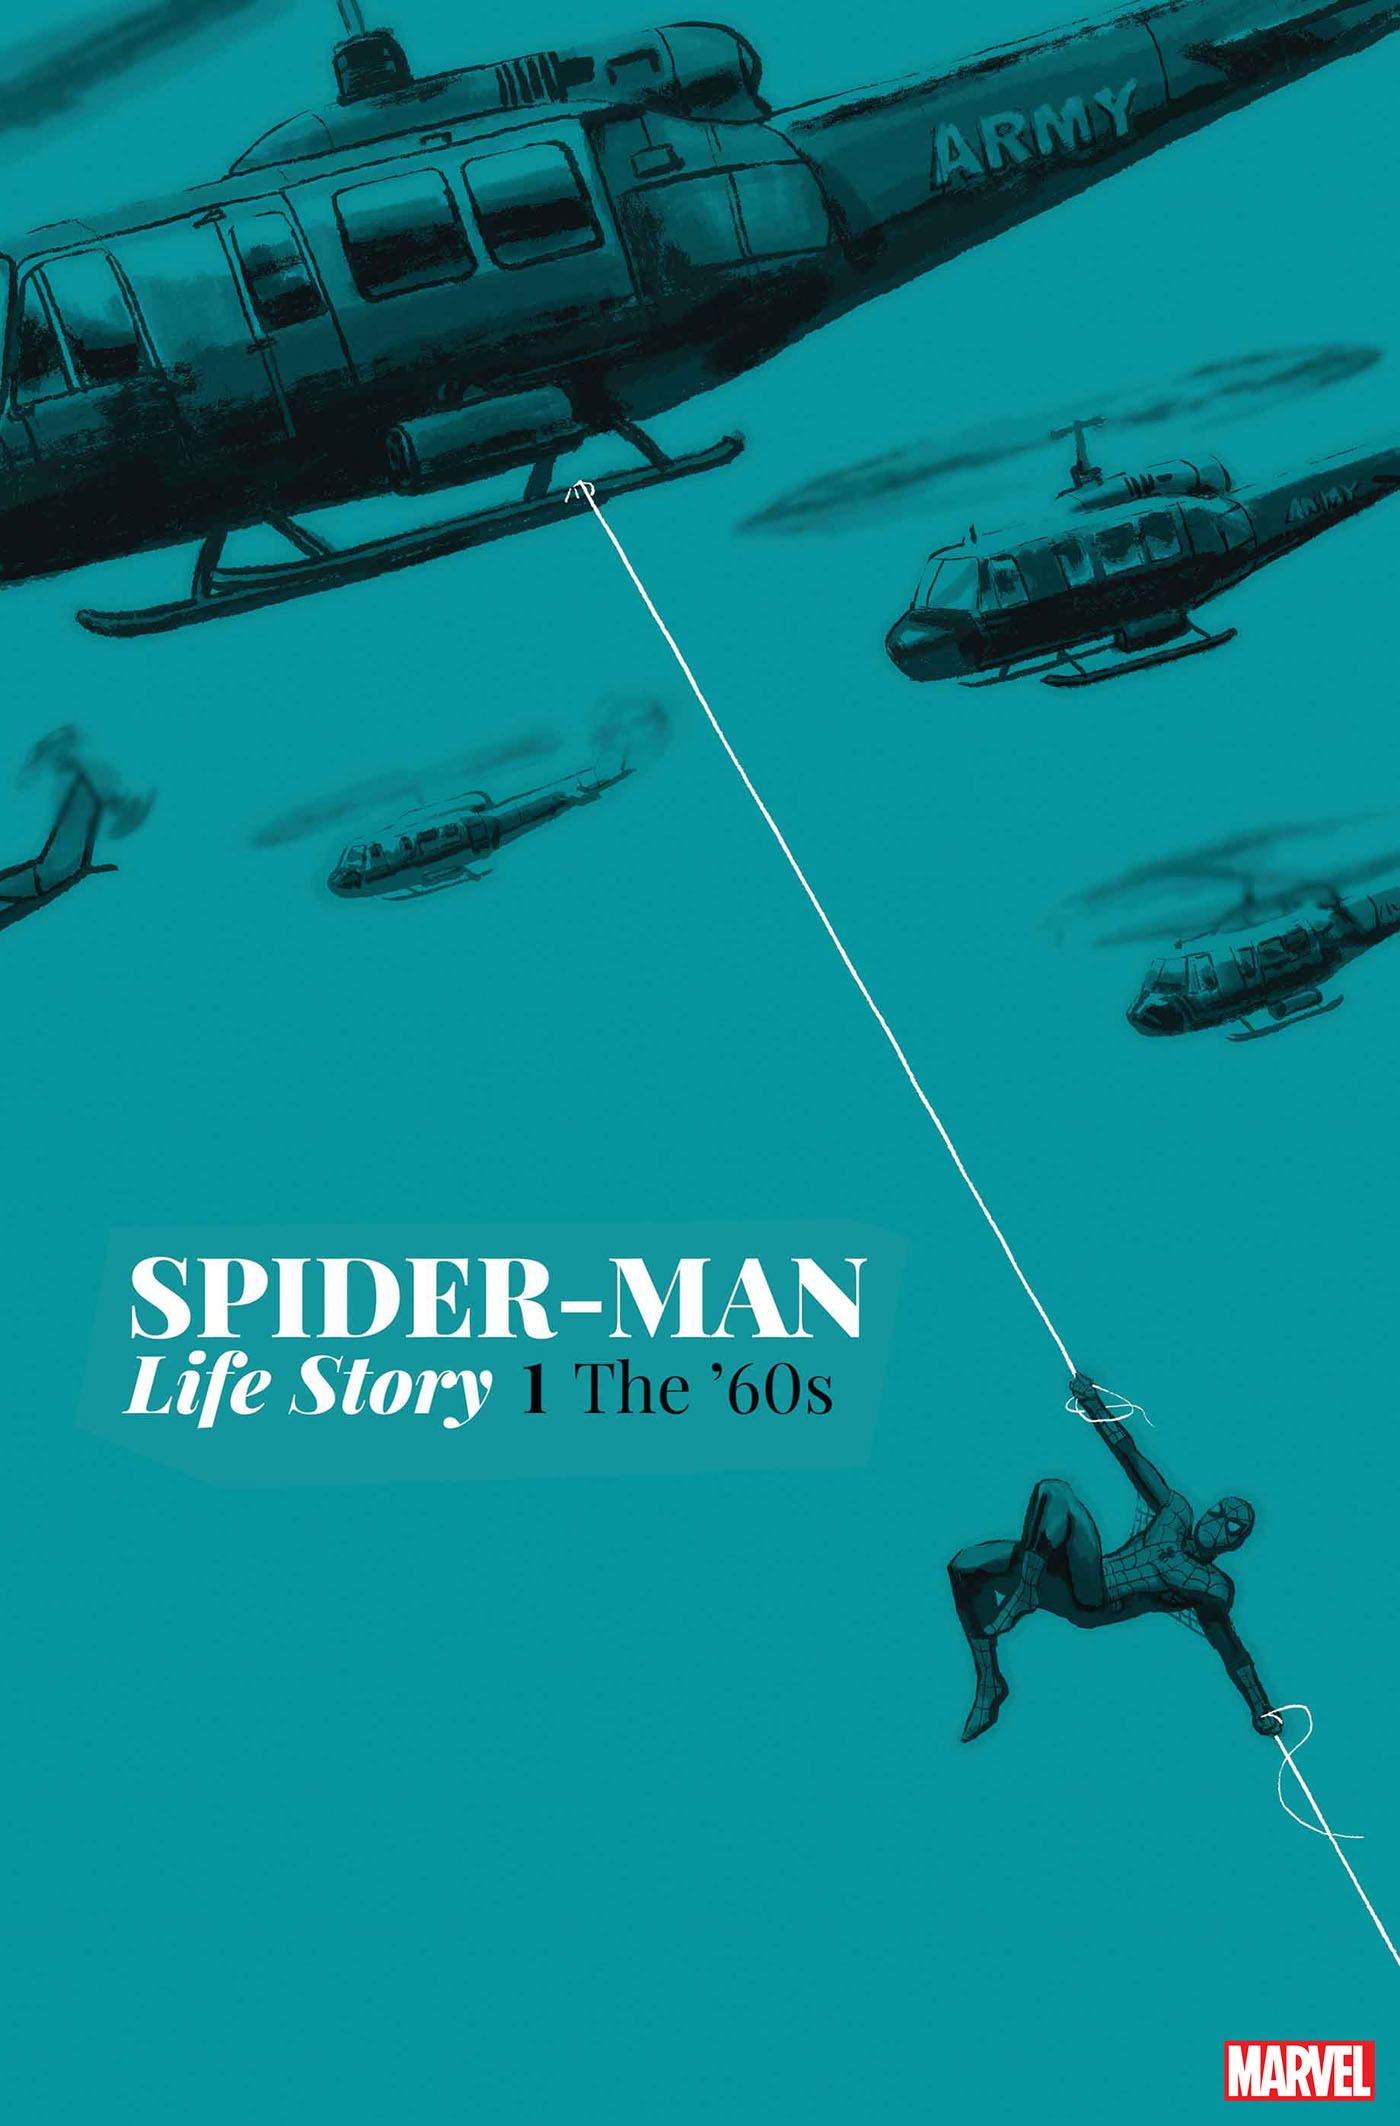 Spider-Man: Life Story Sends Marvel’s Wall-Crawler Back To the ’60s